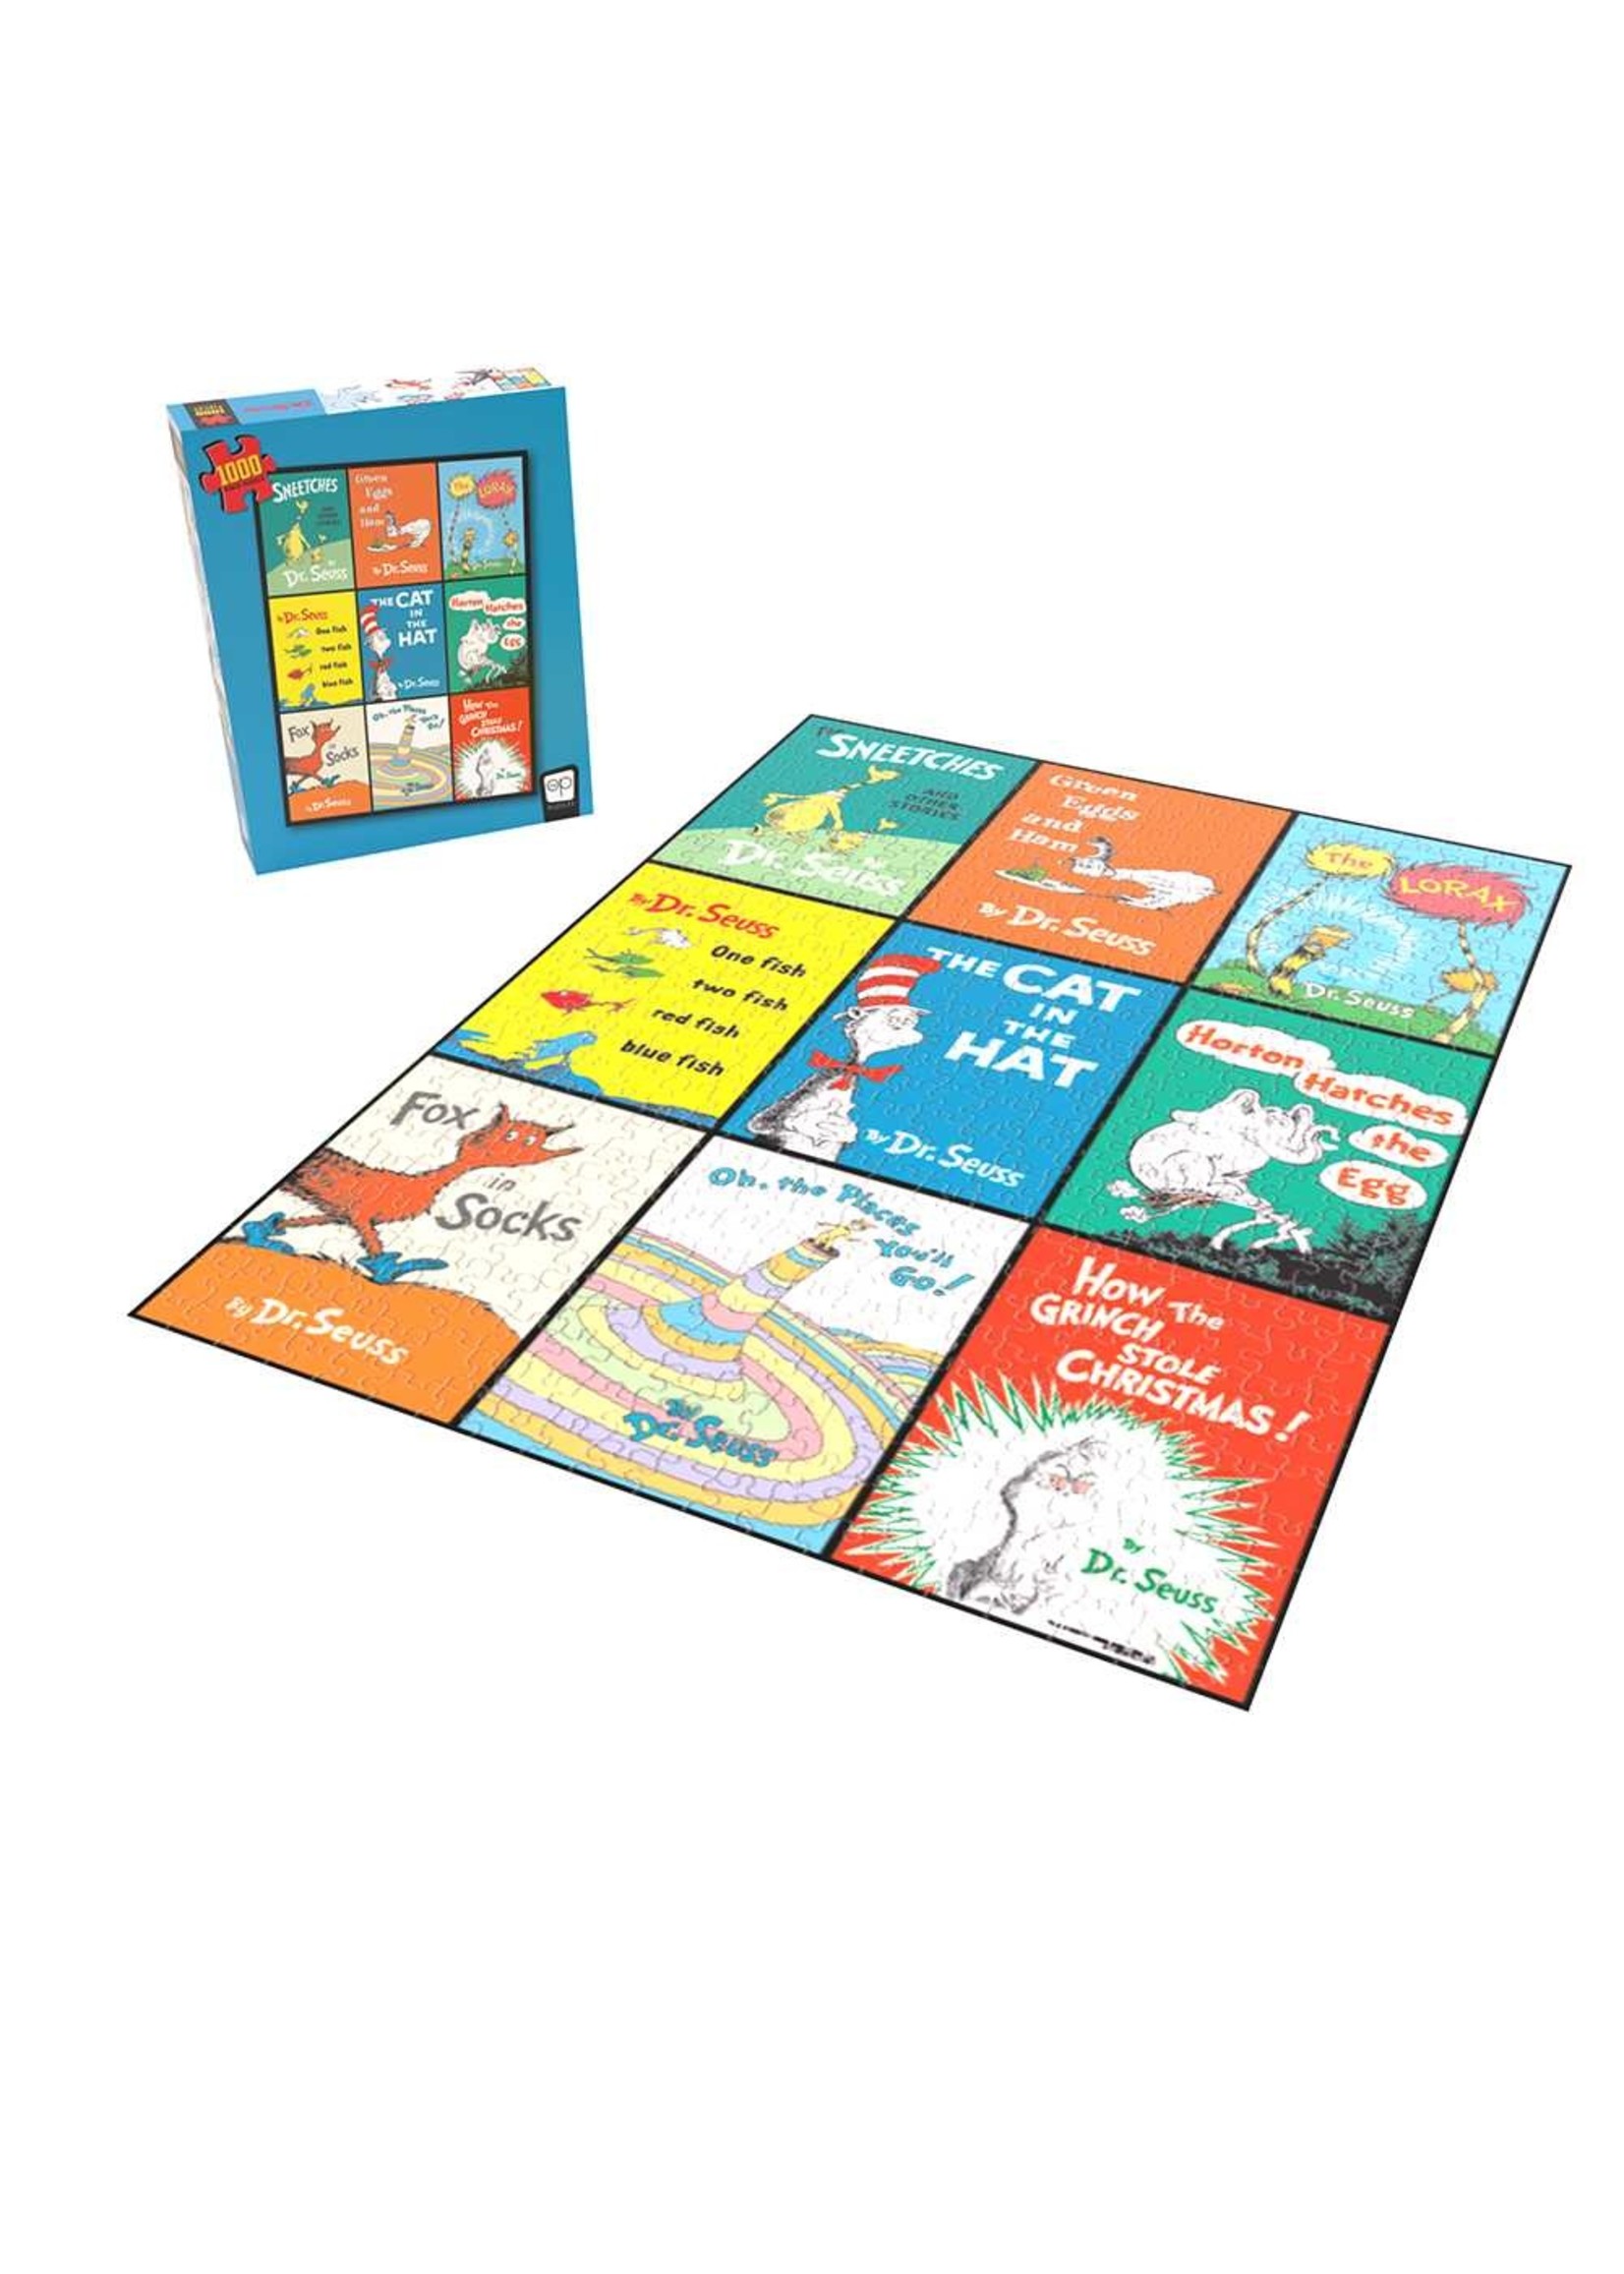 Usaopoly Dr. Seuss Collection 1000 pc